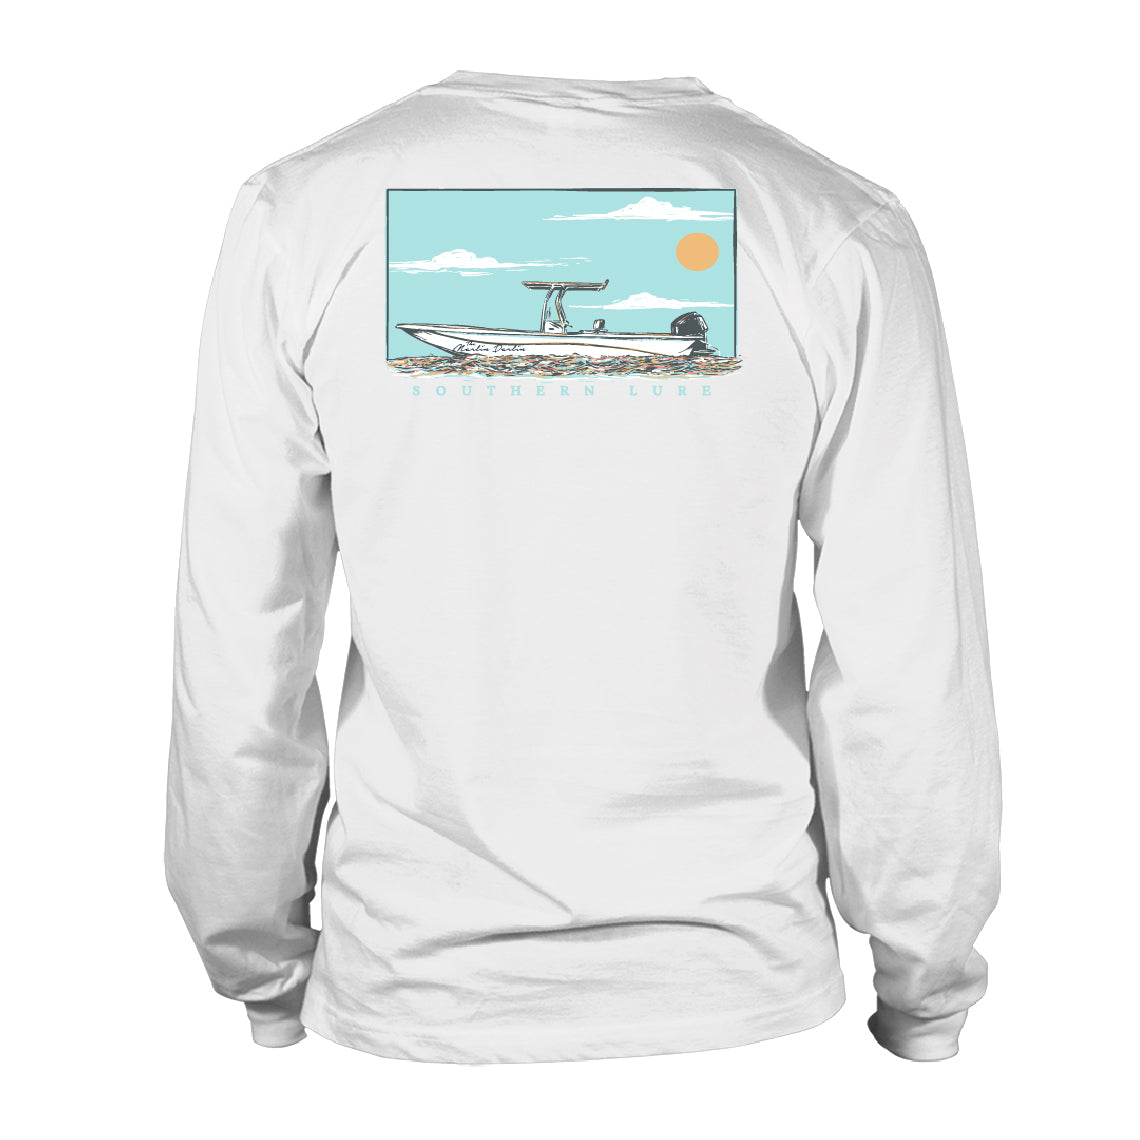 Adult Long Sleeve Cotton T shirt - MD Skiff - White